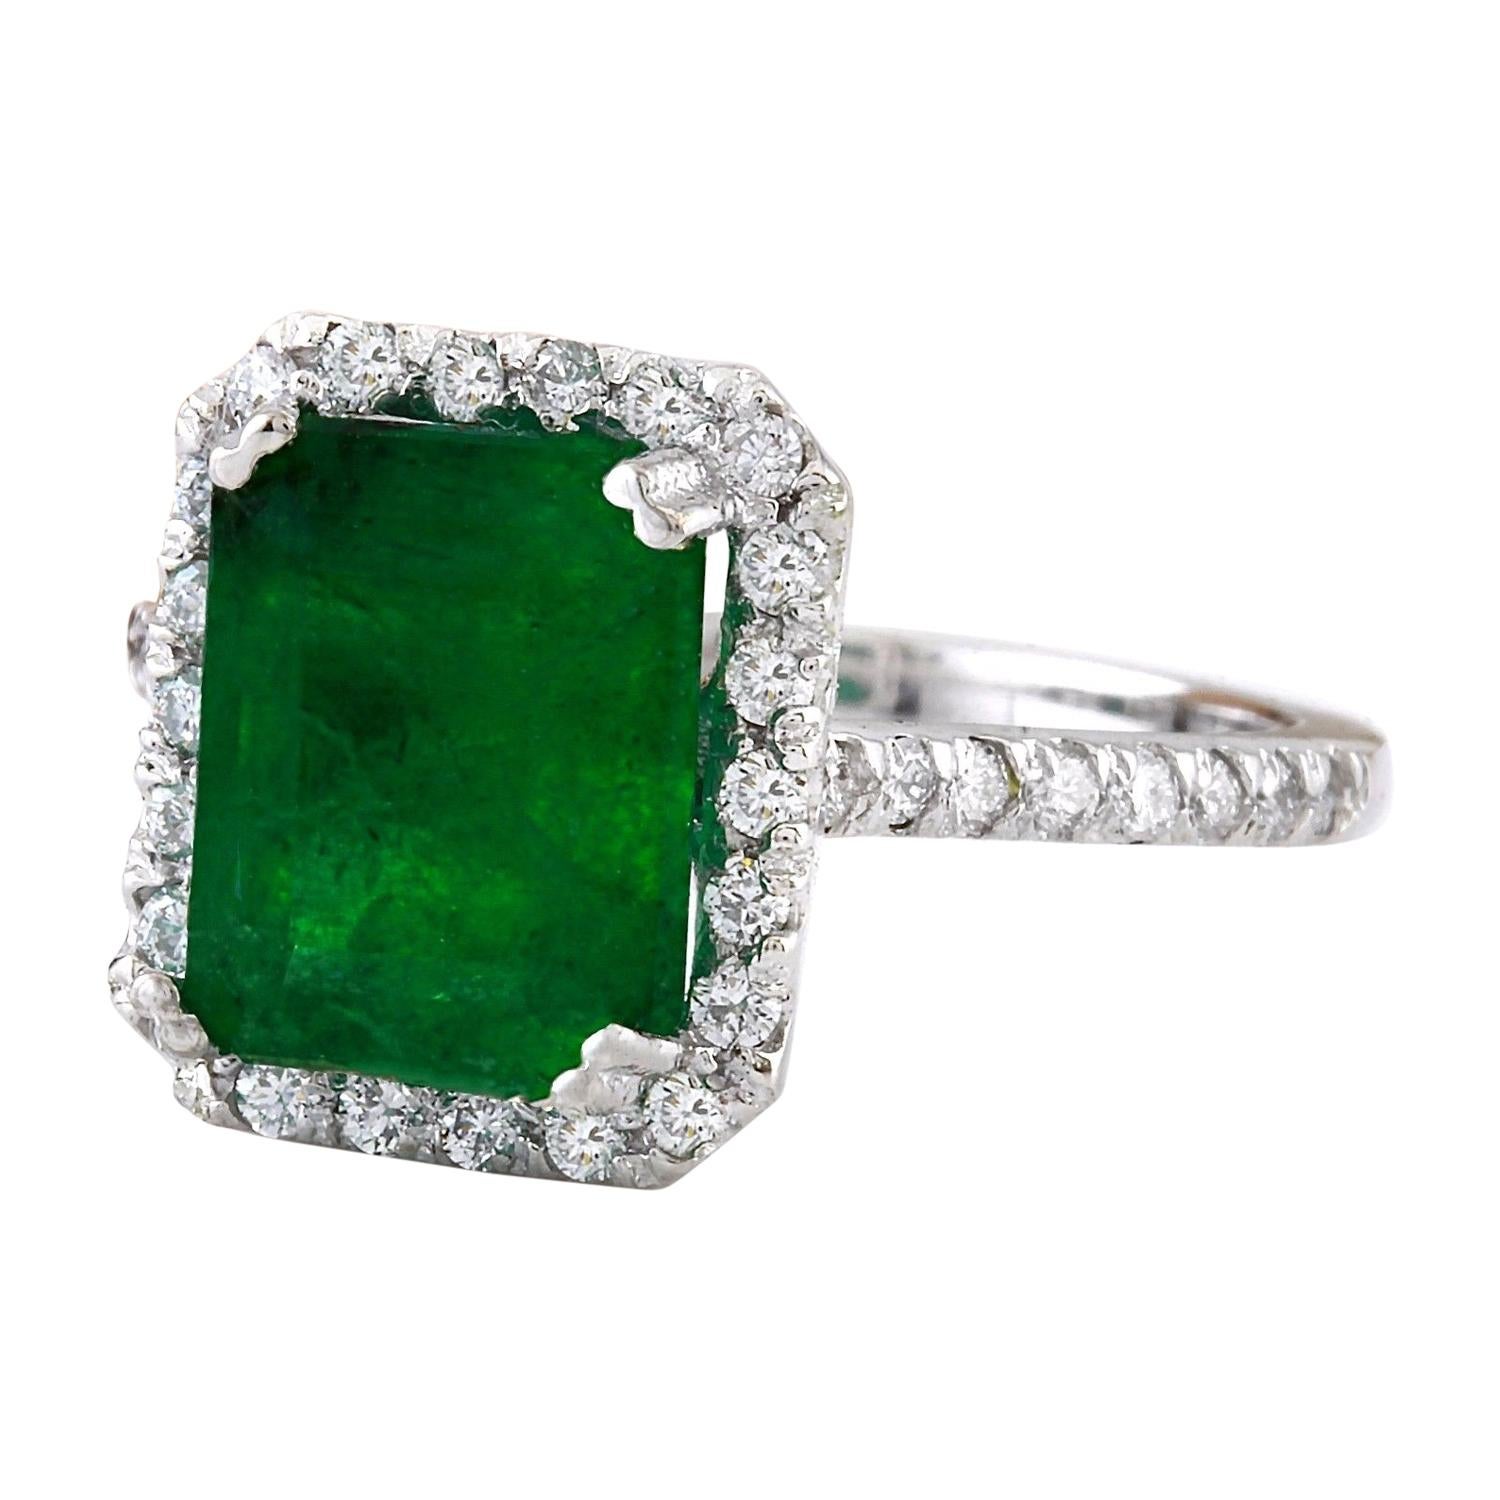 Presenting our exquisite 4.18 Carat Natural Emerald 14K Solid White Gold Diamond Ring:
Crafted from opulent 14K White Gold, this ring features a captivating 3.68 Carat Emerald-cut stone, measuring 10.00x8.00 mm, complemented by a sparkling 0.50